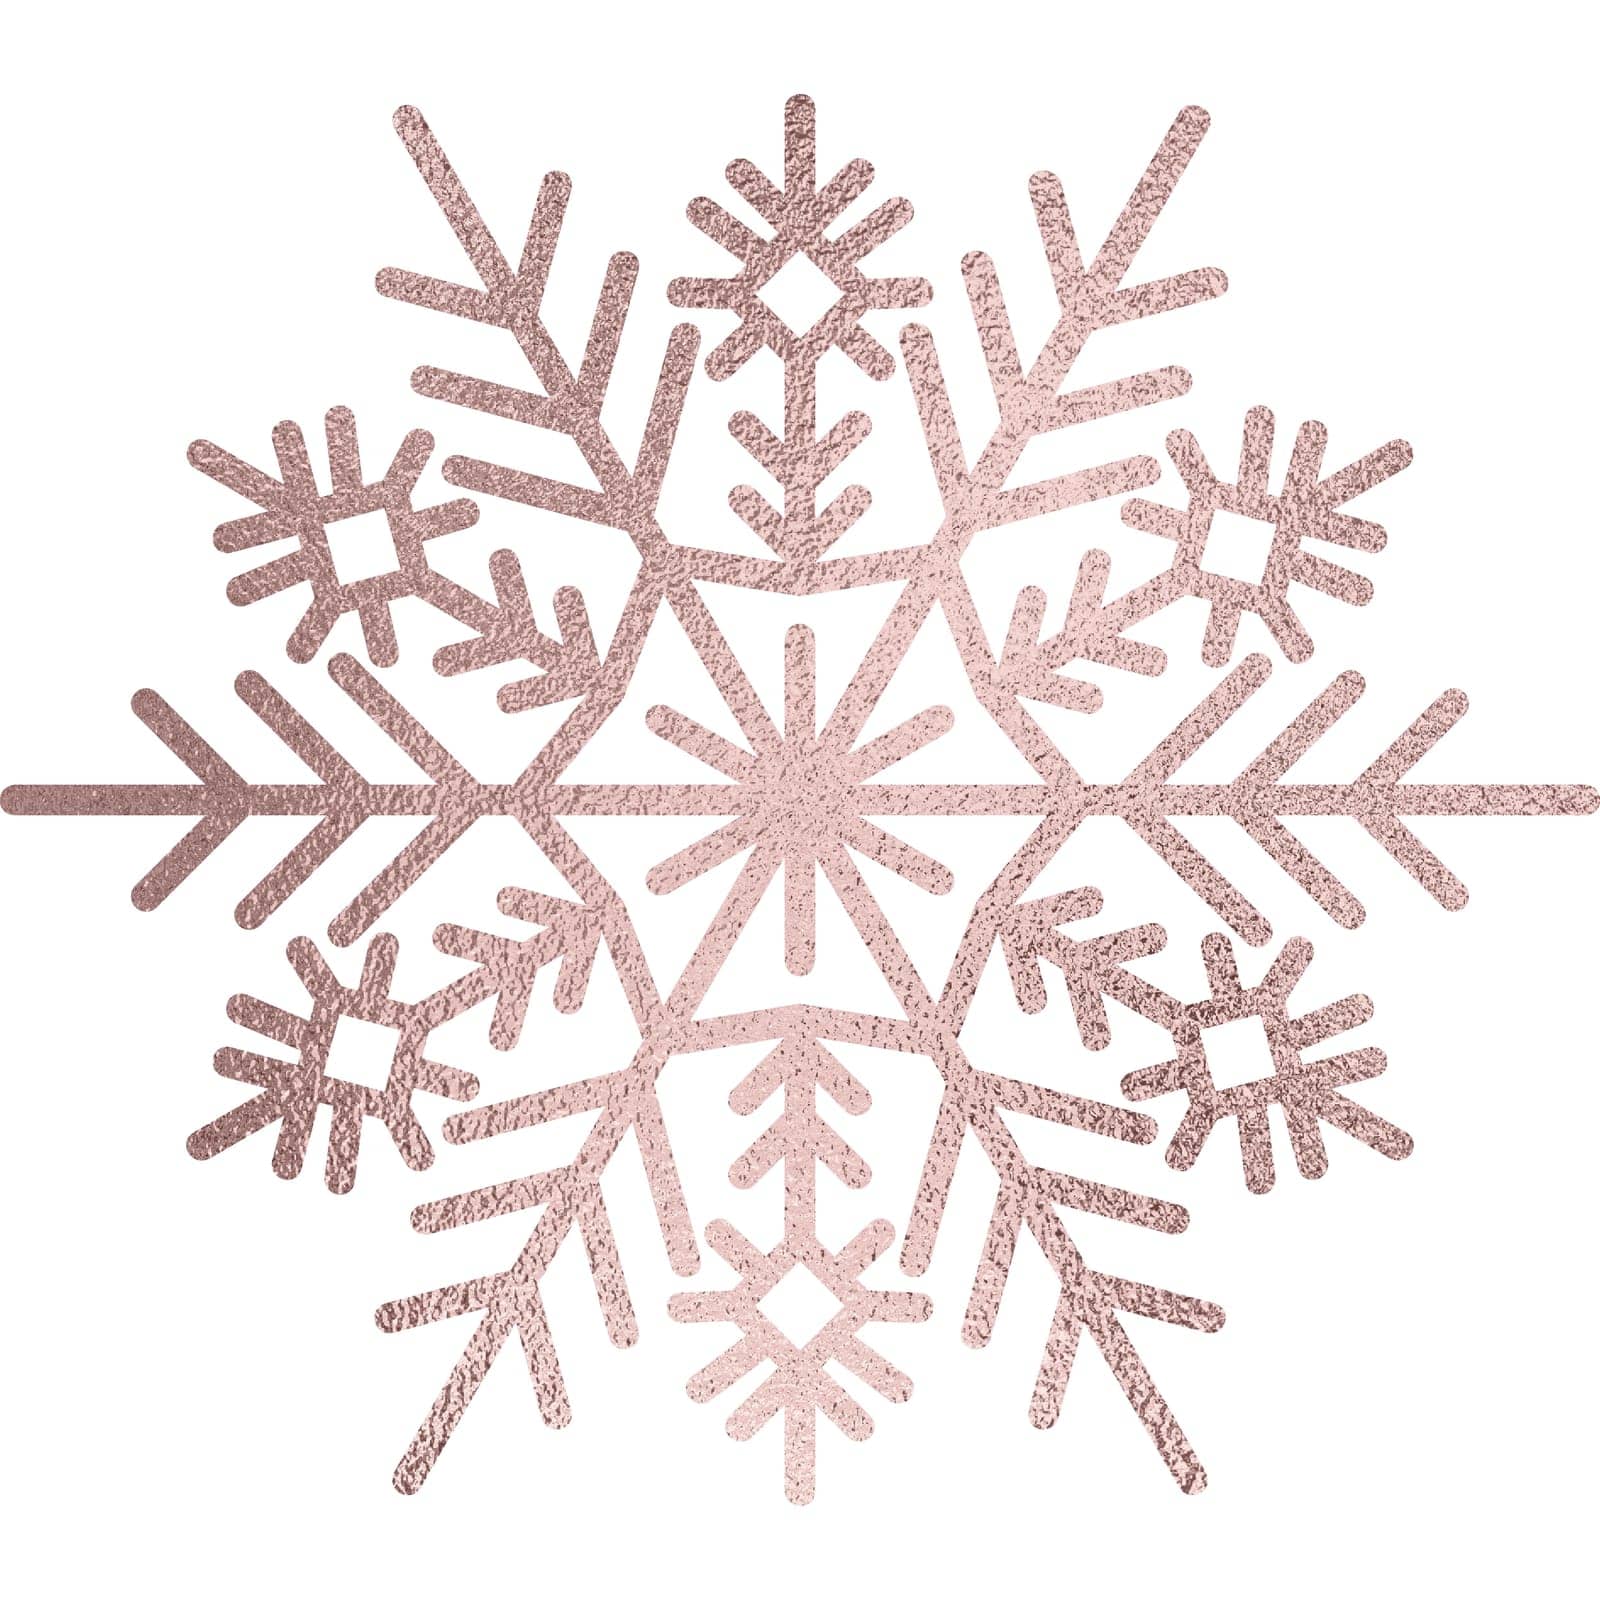 Snowflake rose gold by manudoodle